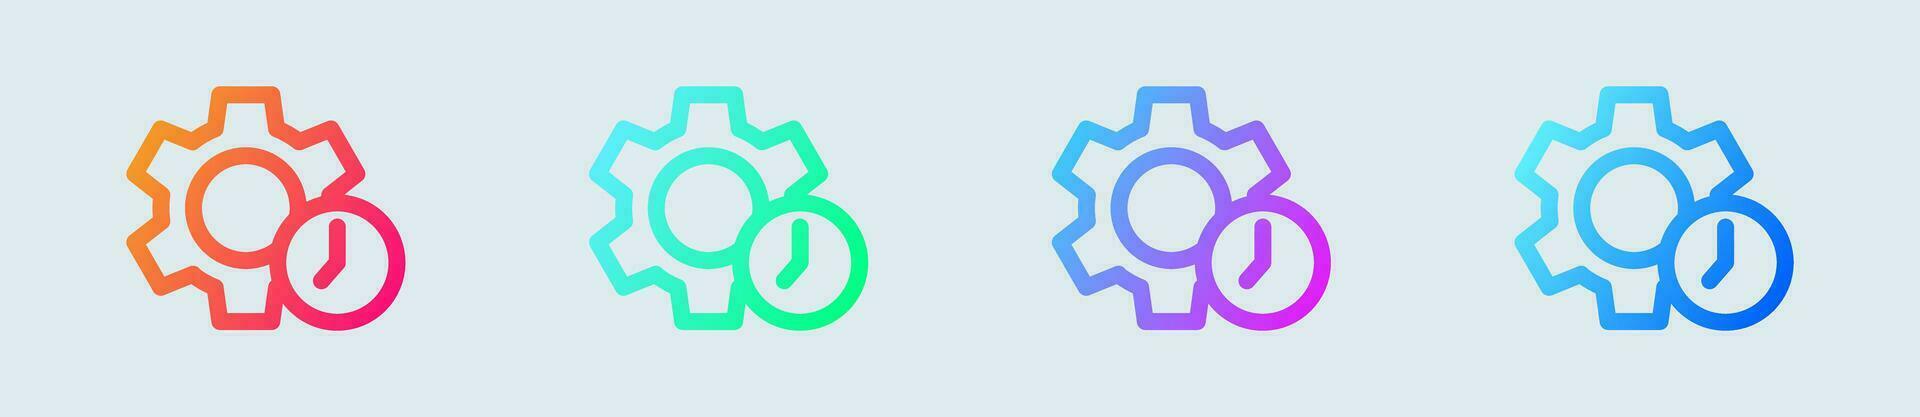 Working line icon in gradient colors. Development signs vector illustration.